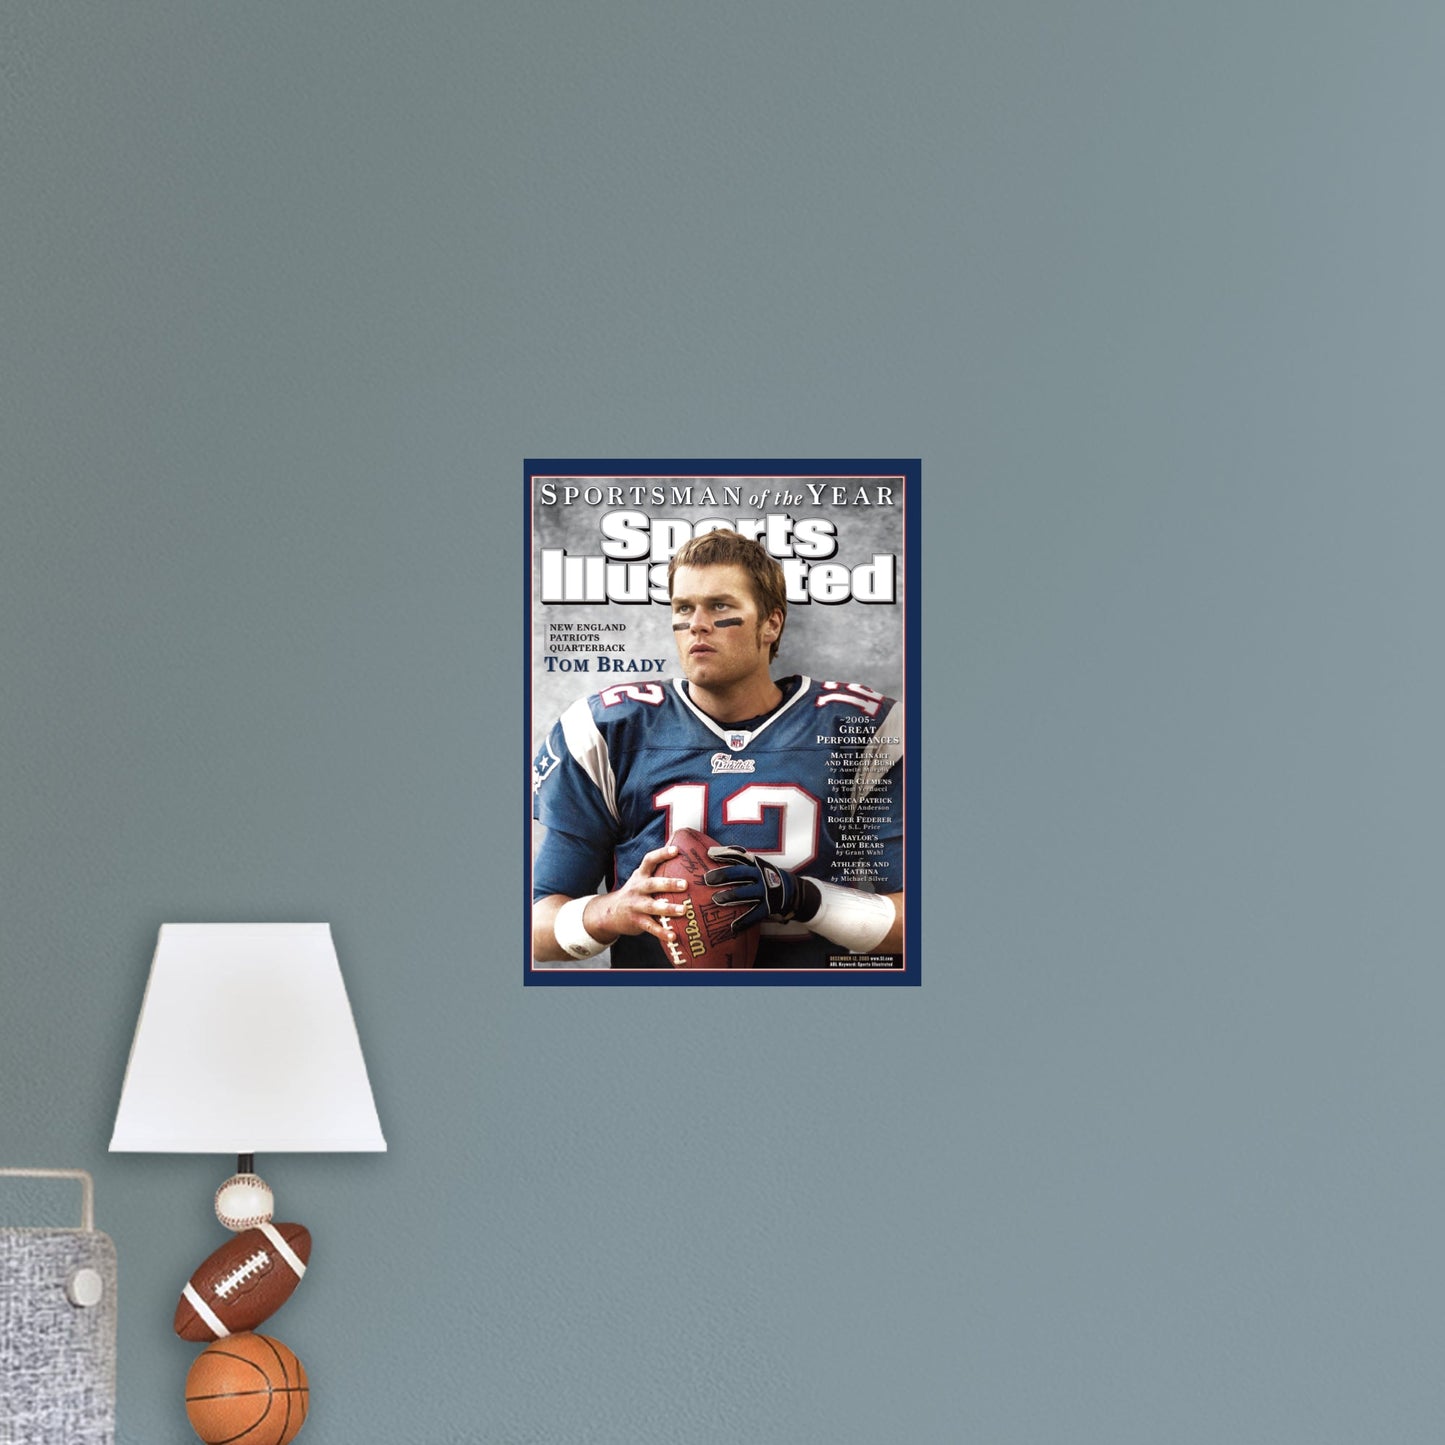 New England Patriots: Tom Brady December 2005 Sportsman of the Year Sports Illustrated Cover - Officially Licensed NFL Removable Adhesive Decal